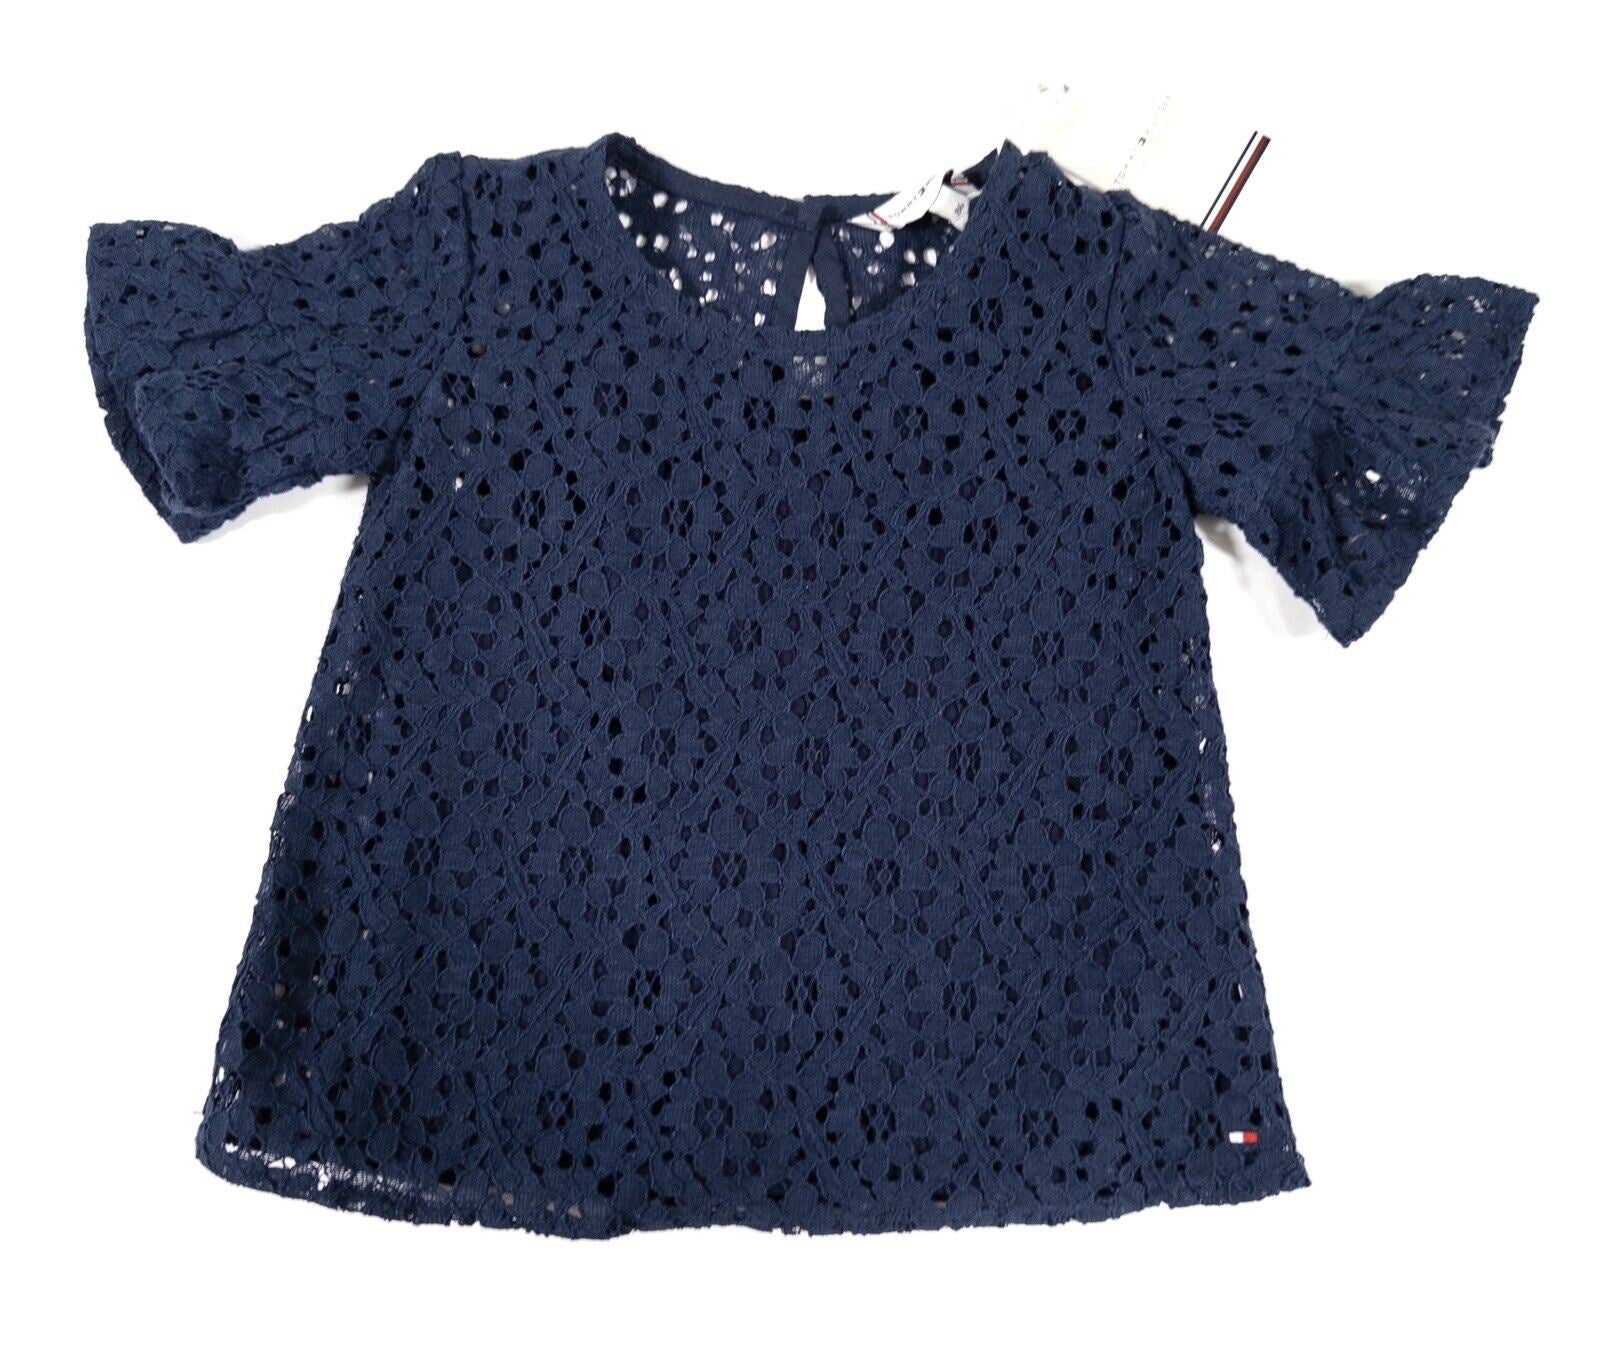 TOMMY HILFIGER Kids Baby Girls Lace Top Navy Blue Size UK 18 Months